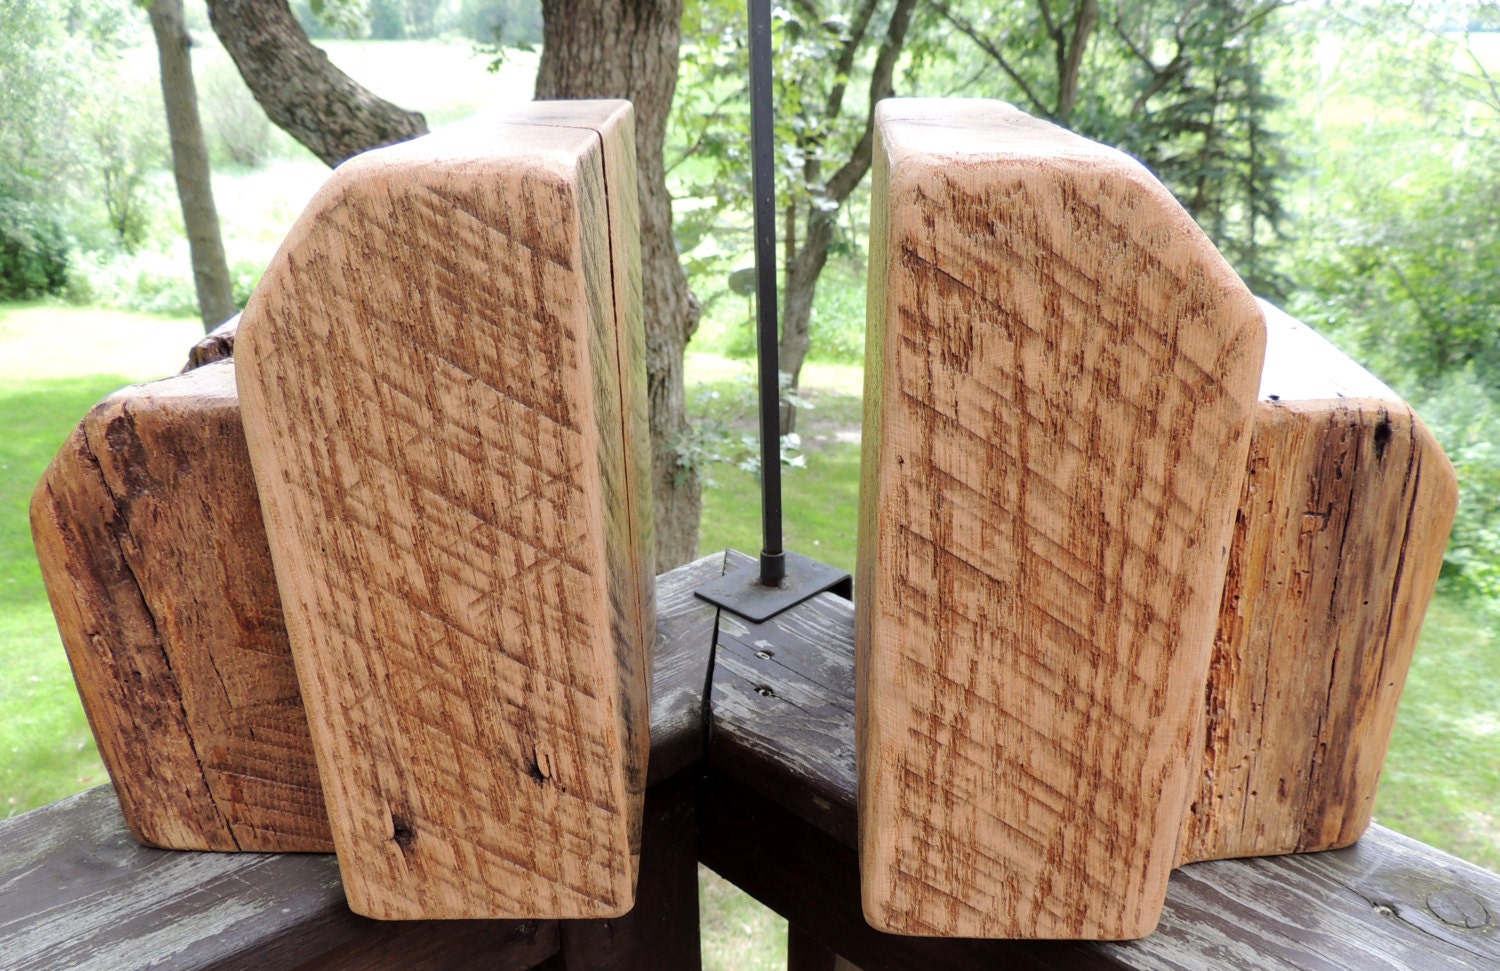 rustic wood bookends